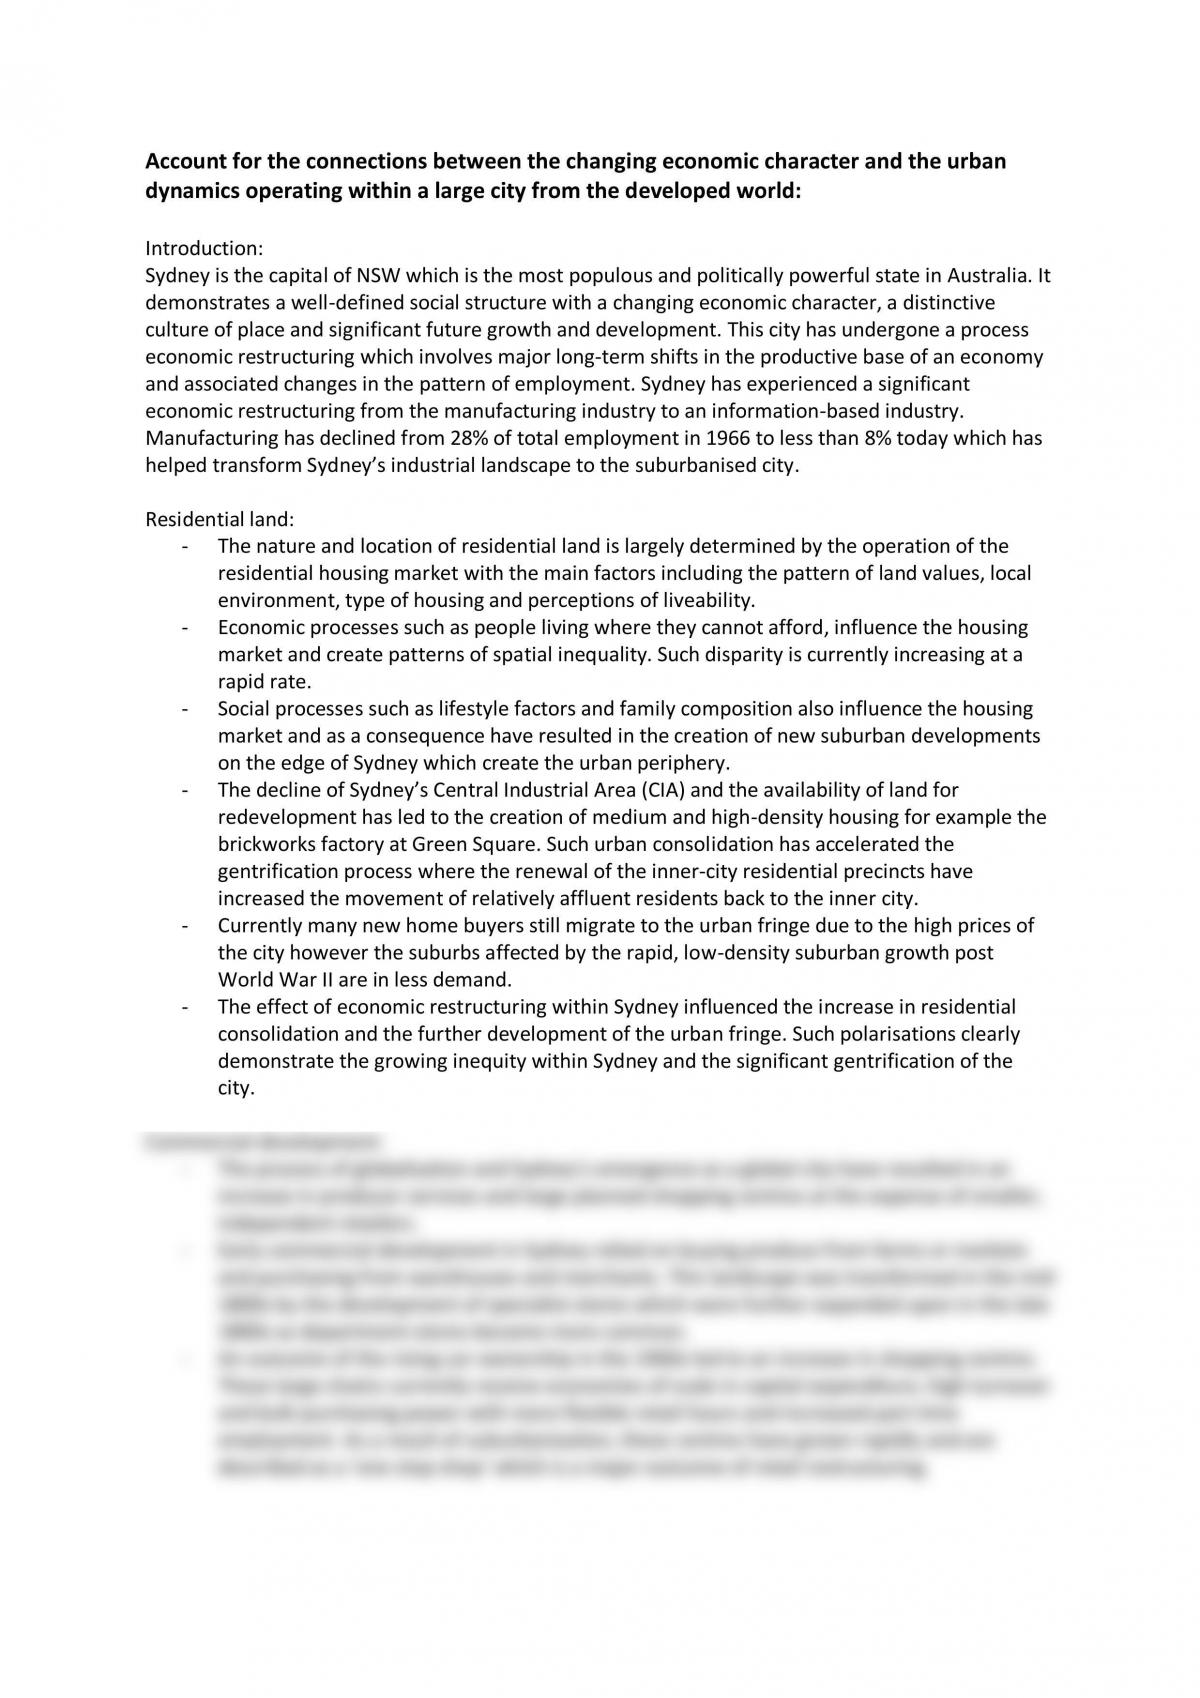 Account for the connections between changing economic character and the urban dynamics operating within a large city in the developed world  - Page 1